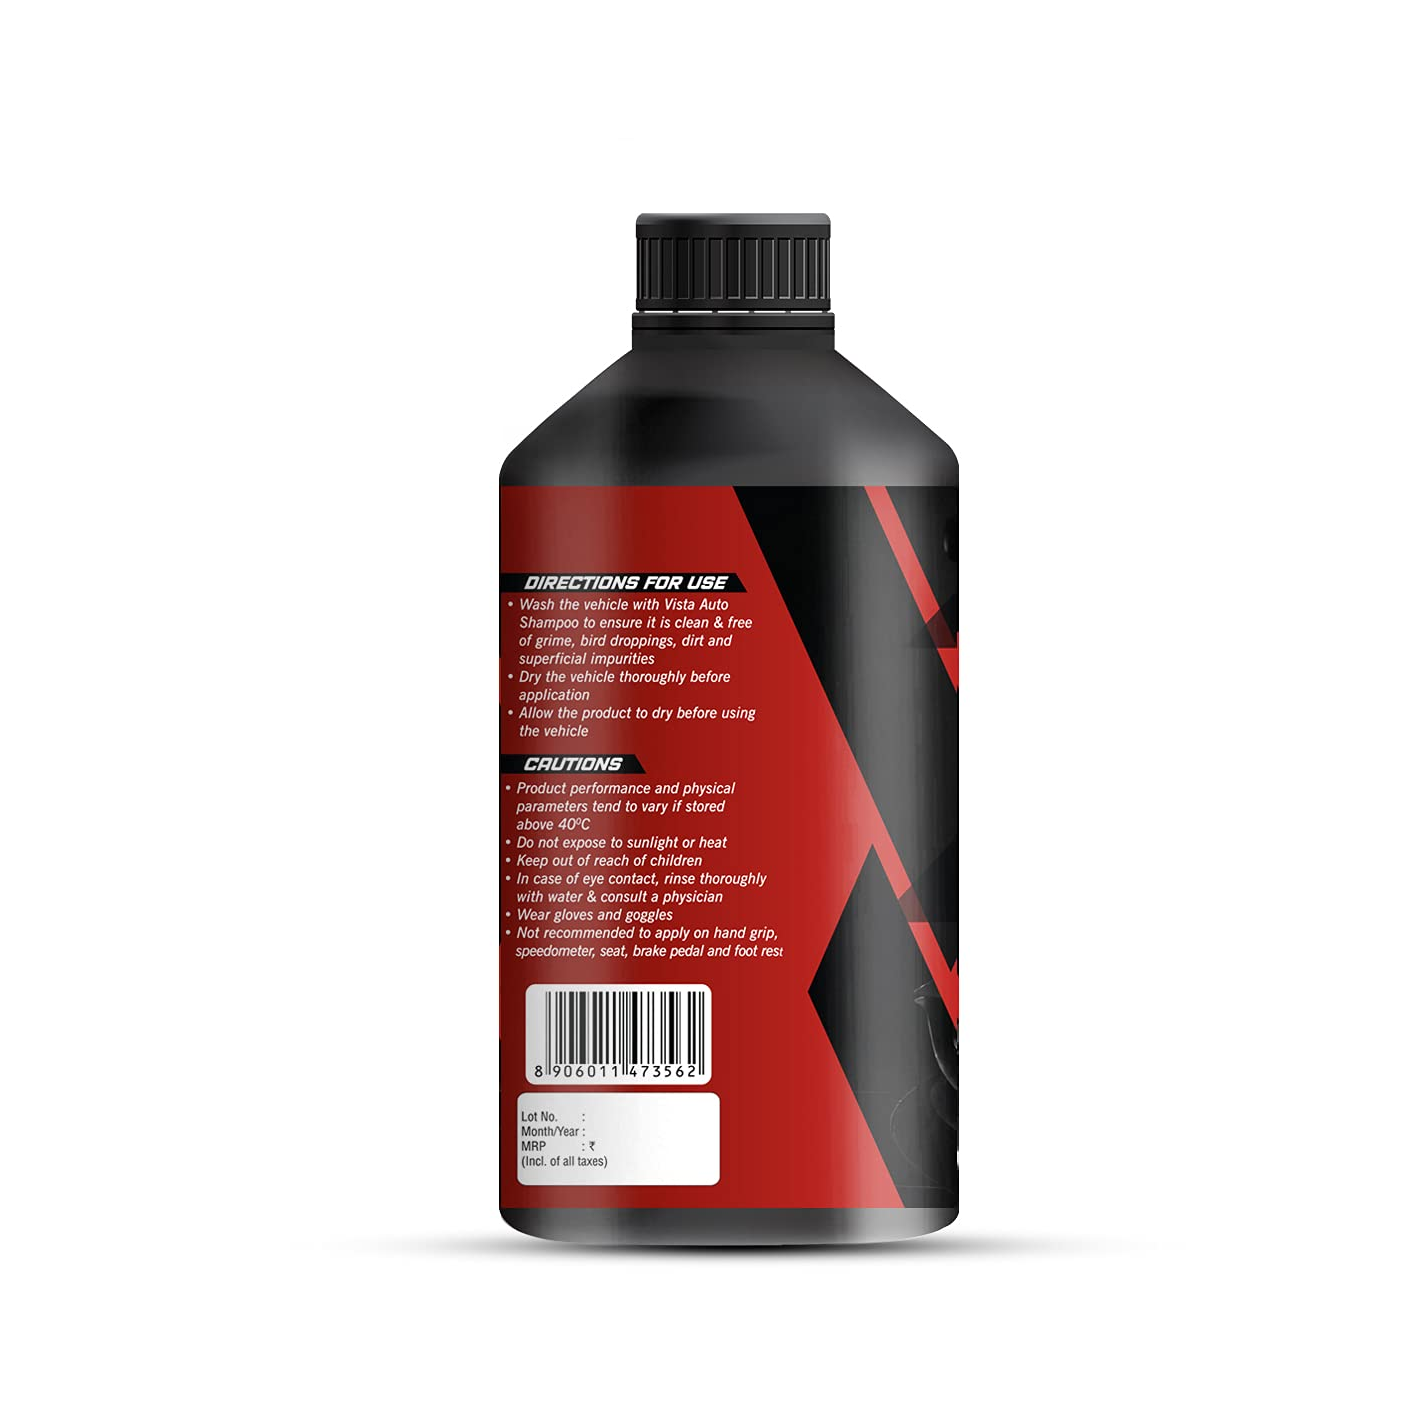 Extend your bike and scooter shine for days with the powerful solvent of Reshine Two Wheeler Gloss. The unique formulation of our bike shine is easy to use and makes all the plastic, metal, vinyl, and rubber parts dust resistant and fade-proof.